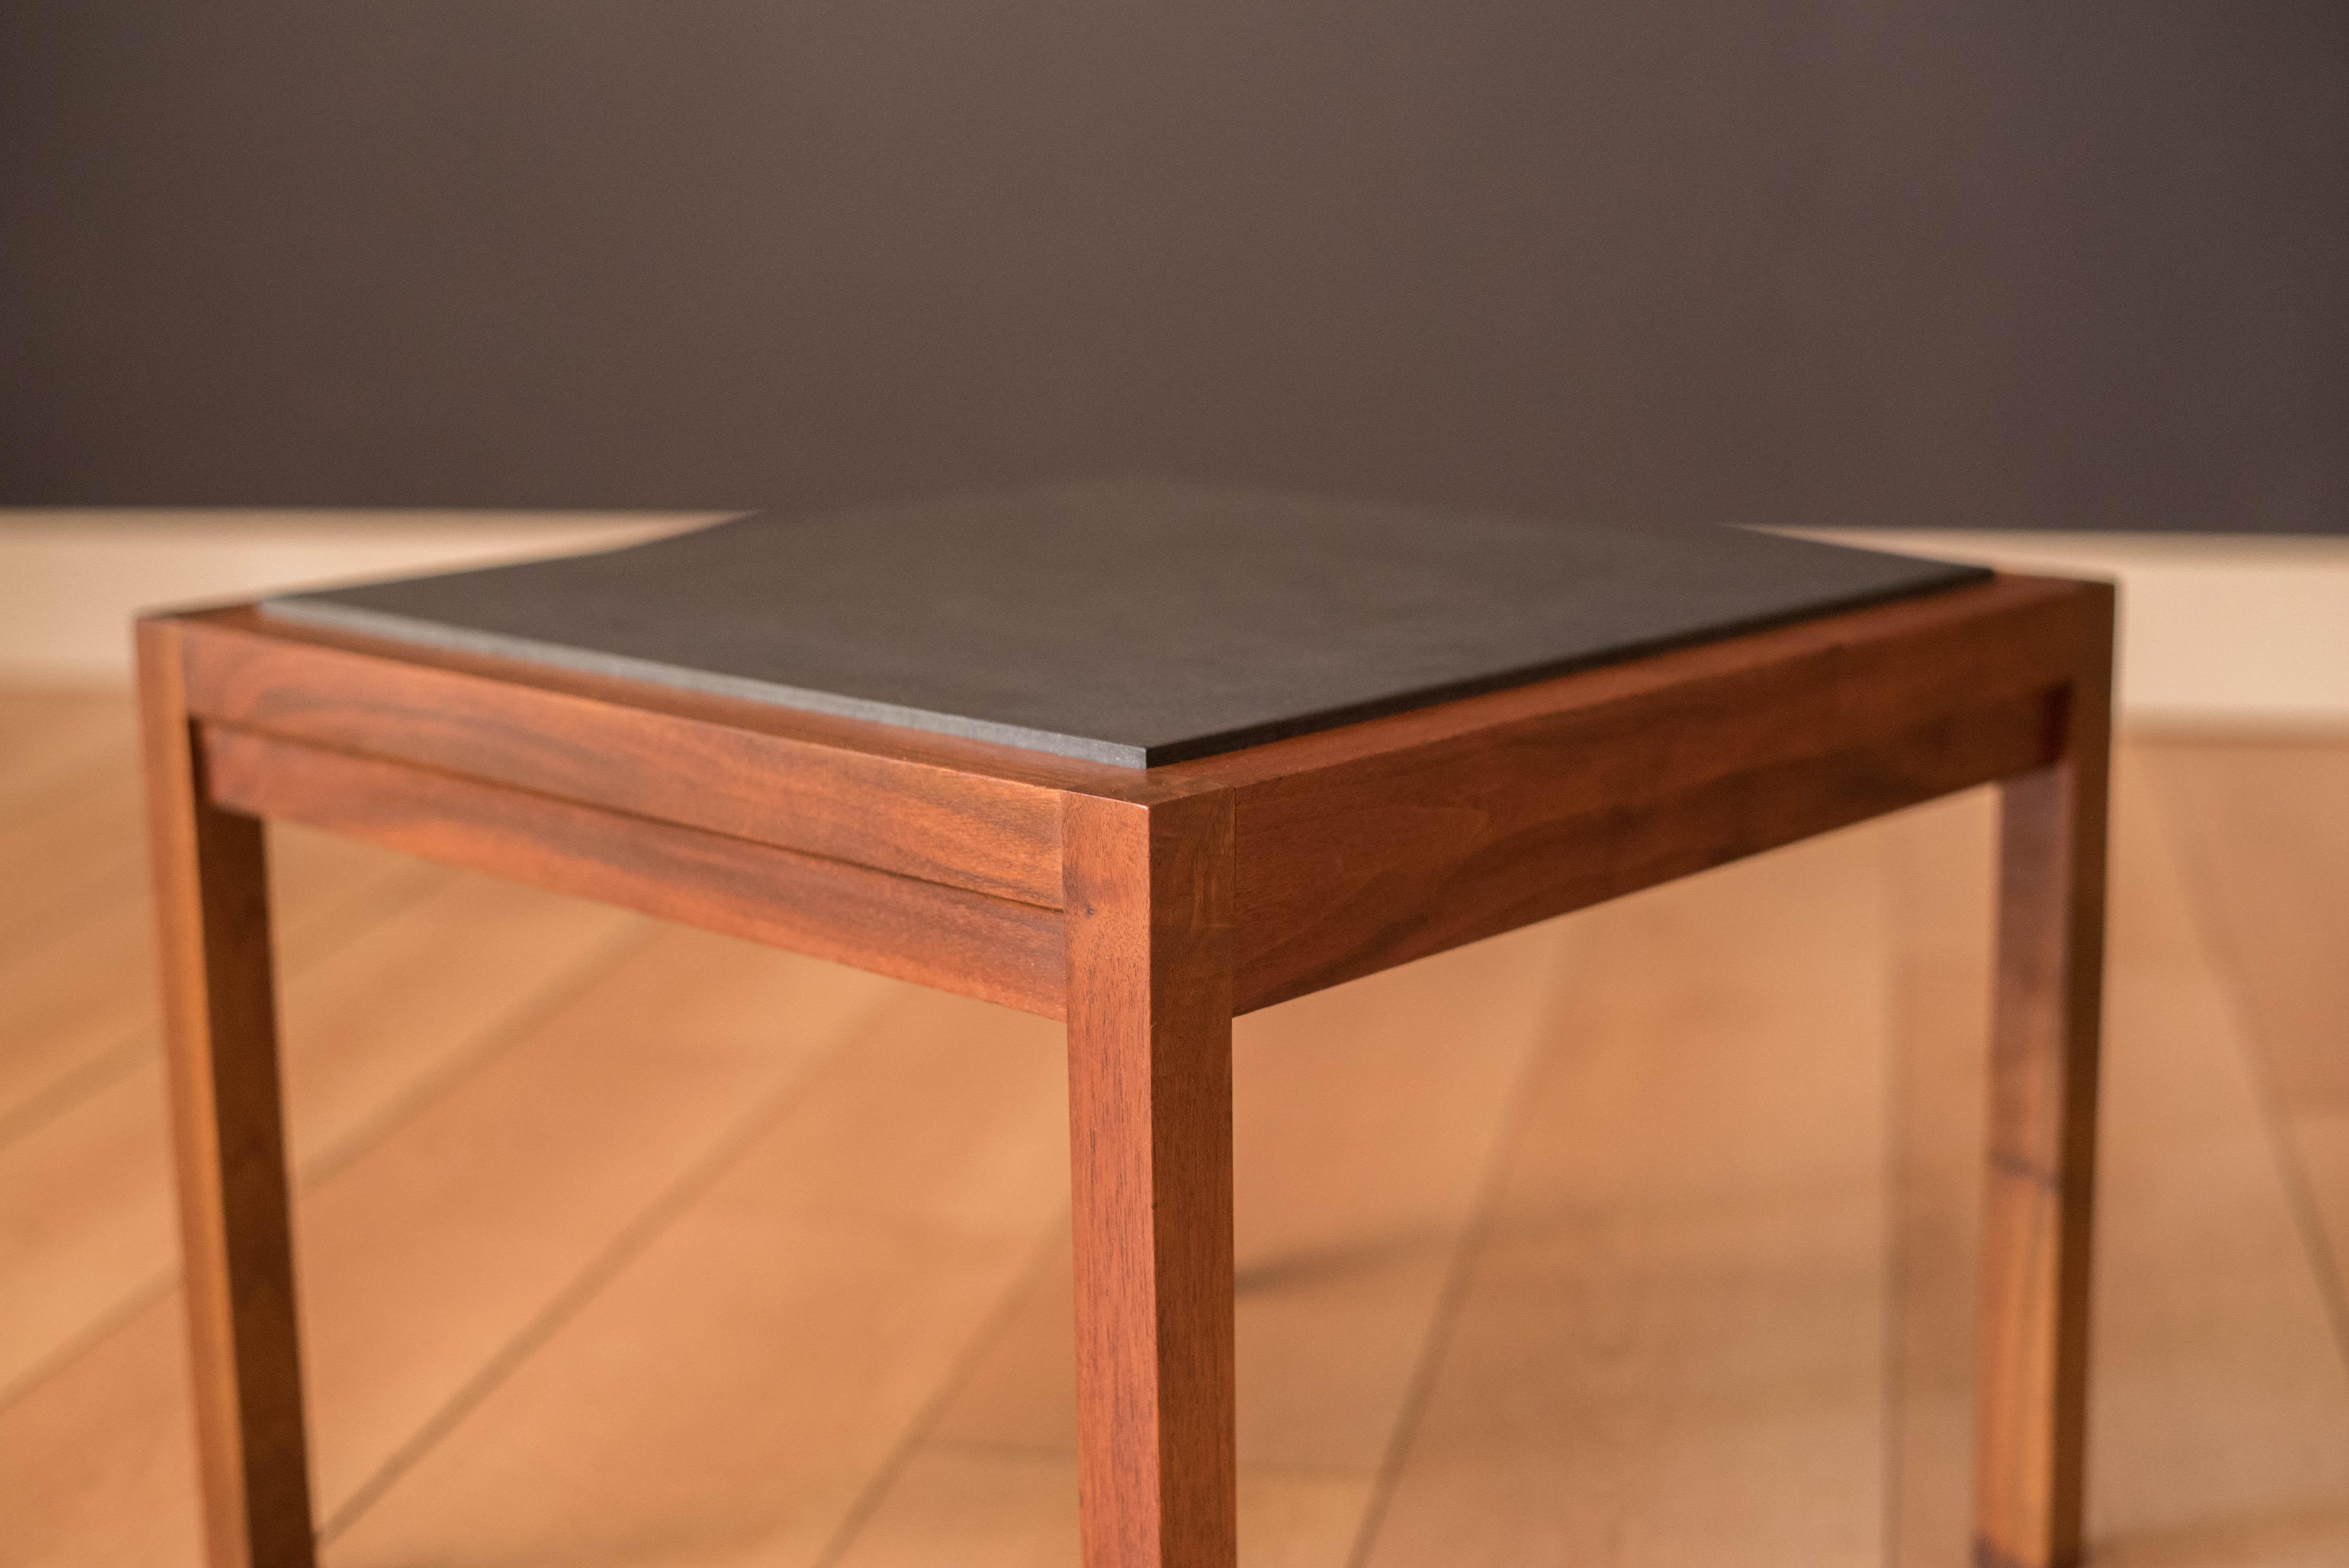 American Pair of Mid Century Slate and Walnut End Tables by Jack Cartwright for Founders